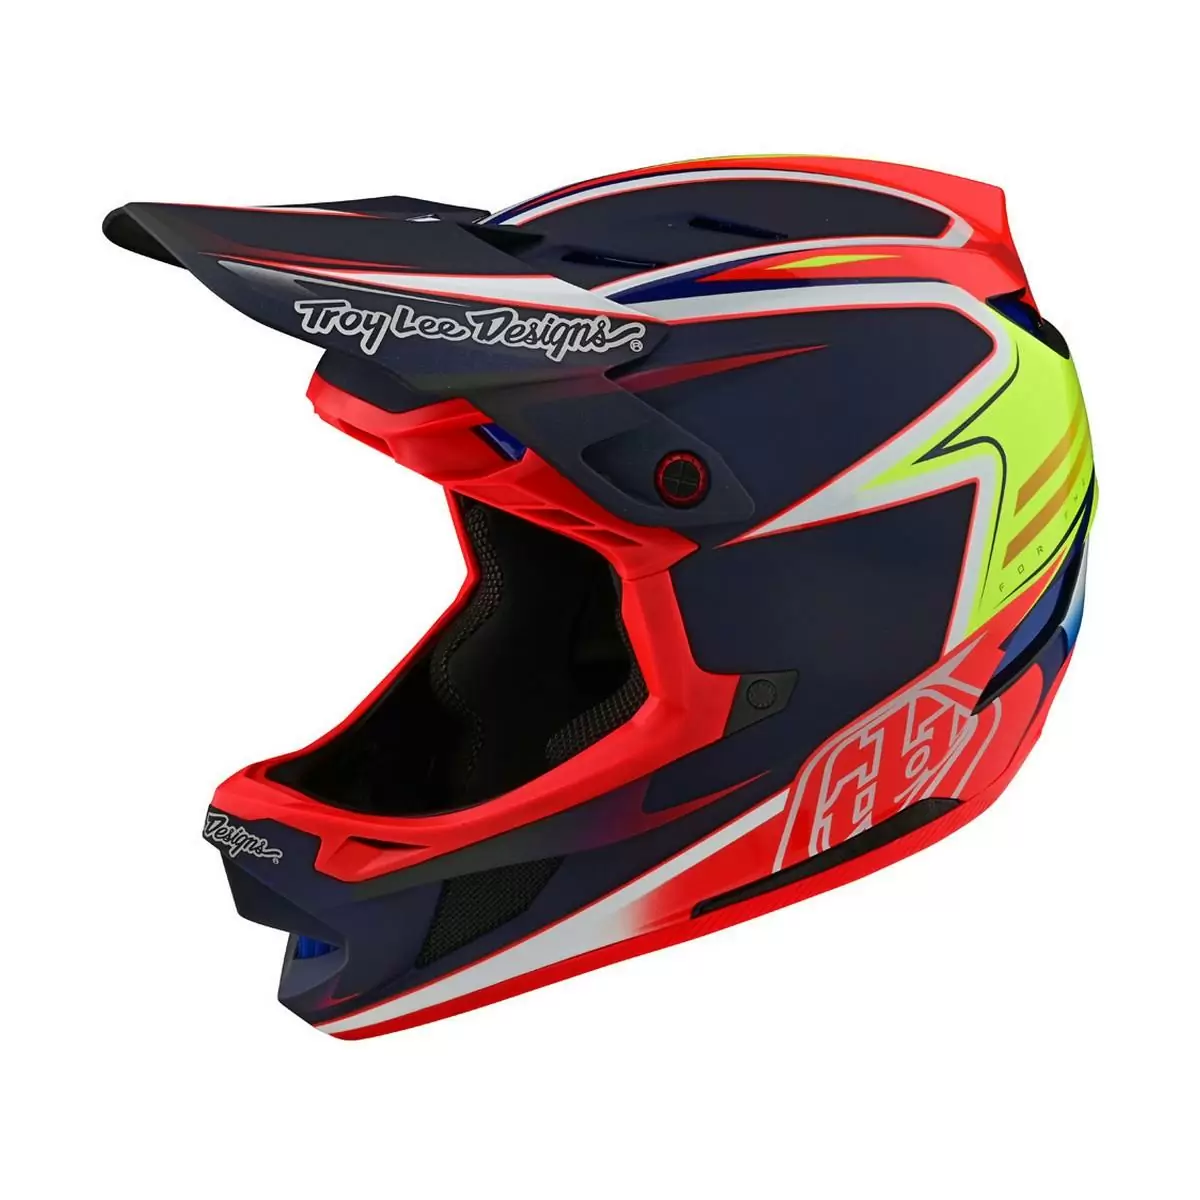 Full Face MTB Helmet D4 MIPS TeXtreme Carbon Stealth Black/Red Size S (55-56cm) #1